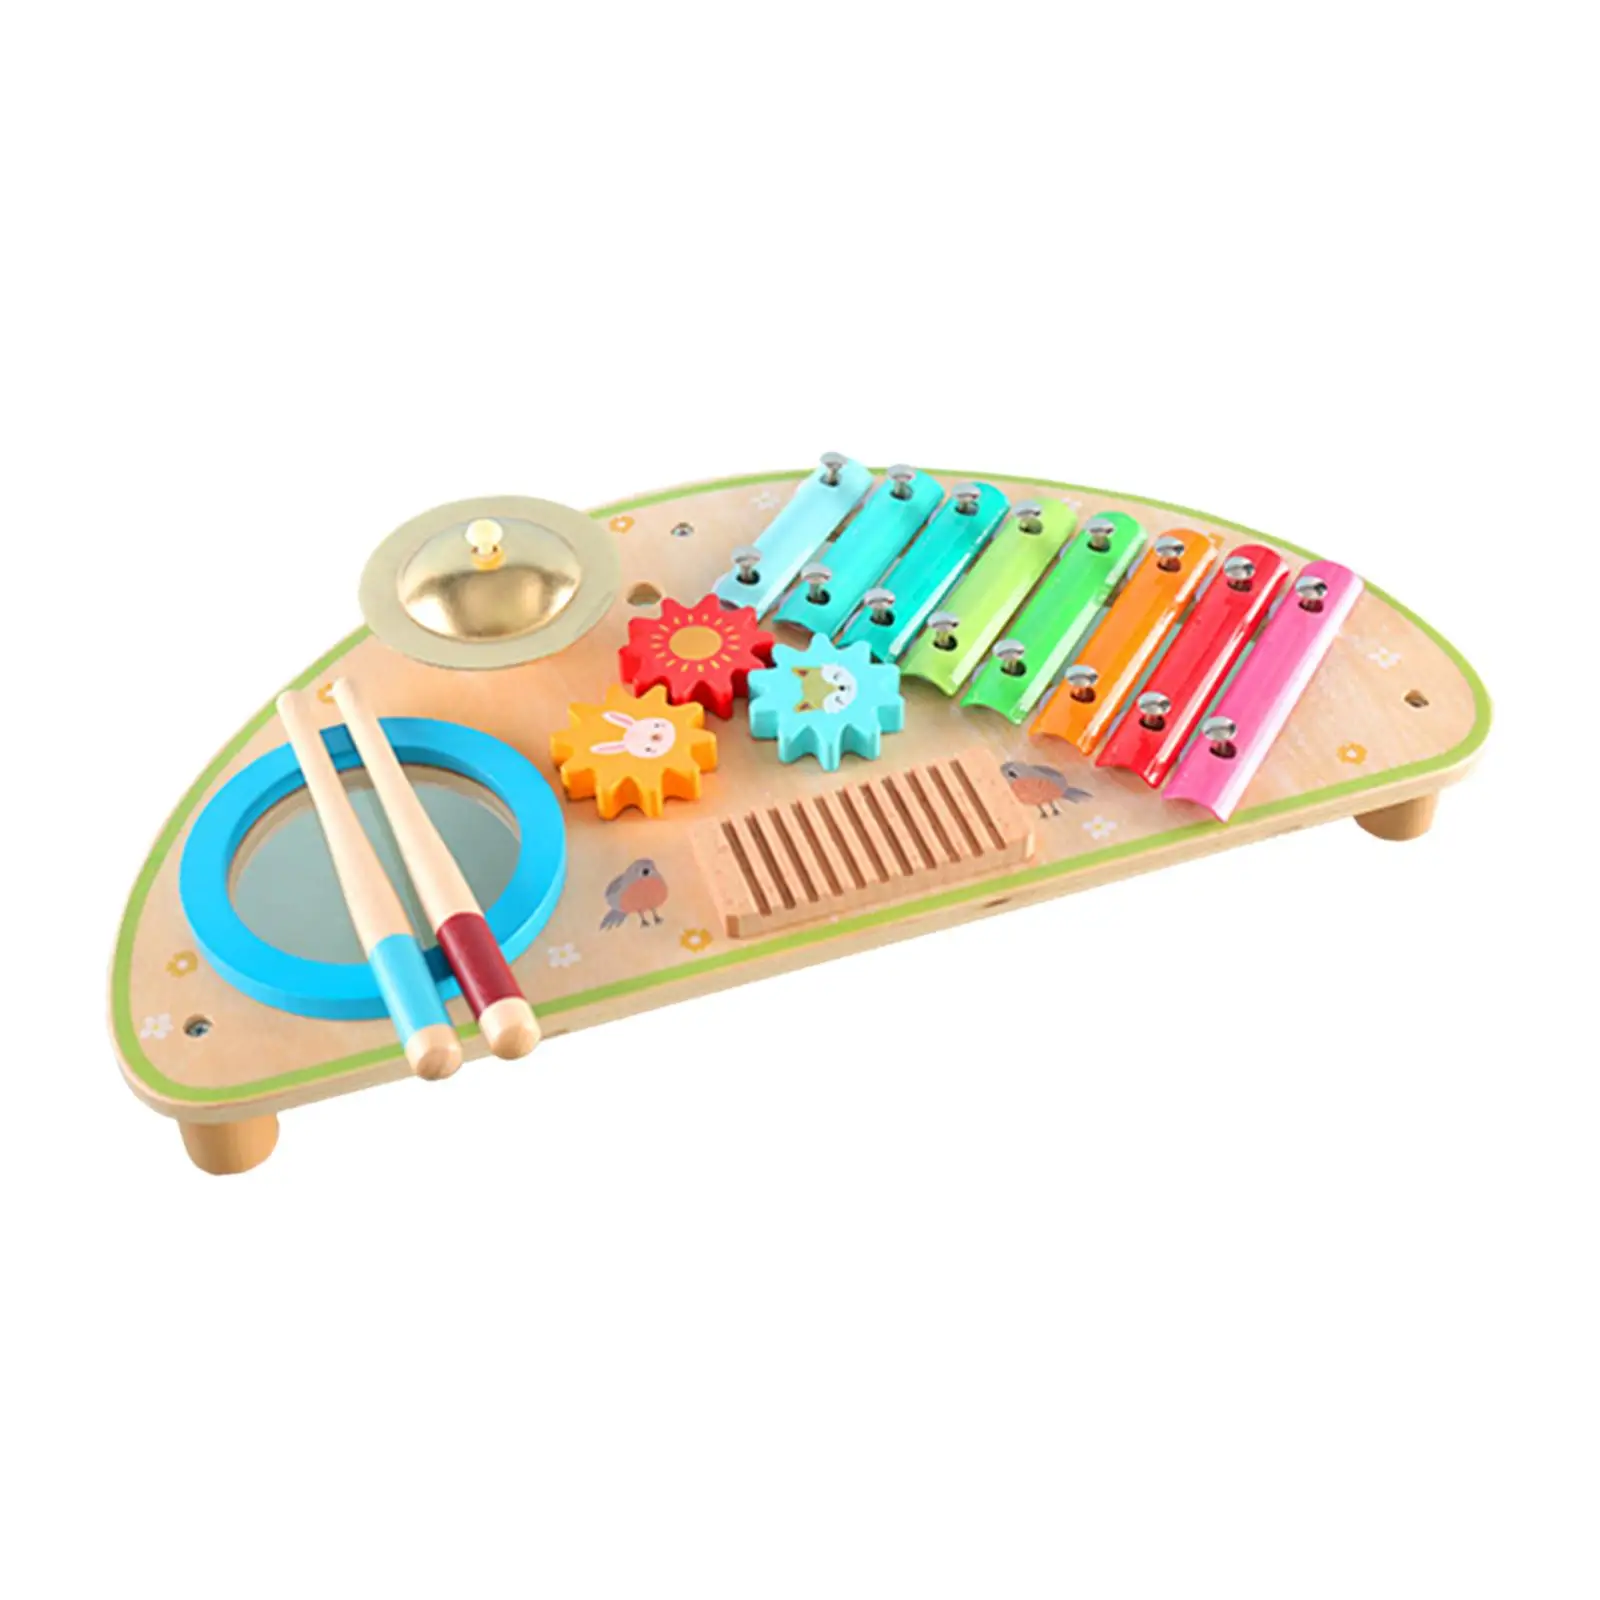 Xylophone Drum Set Multifunction Wooden Percussion Musical Toys for Ages 3 4 5 6 Years Old Toddlers Kids Boy Girl Children